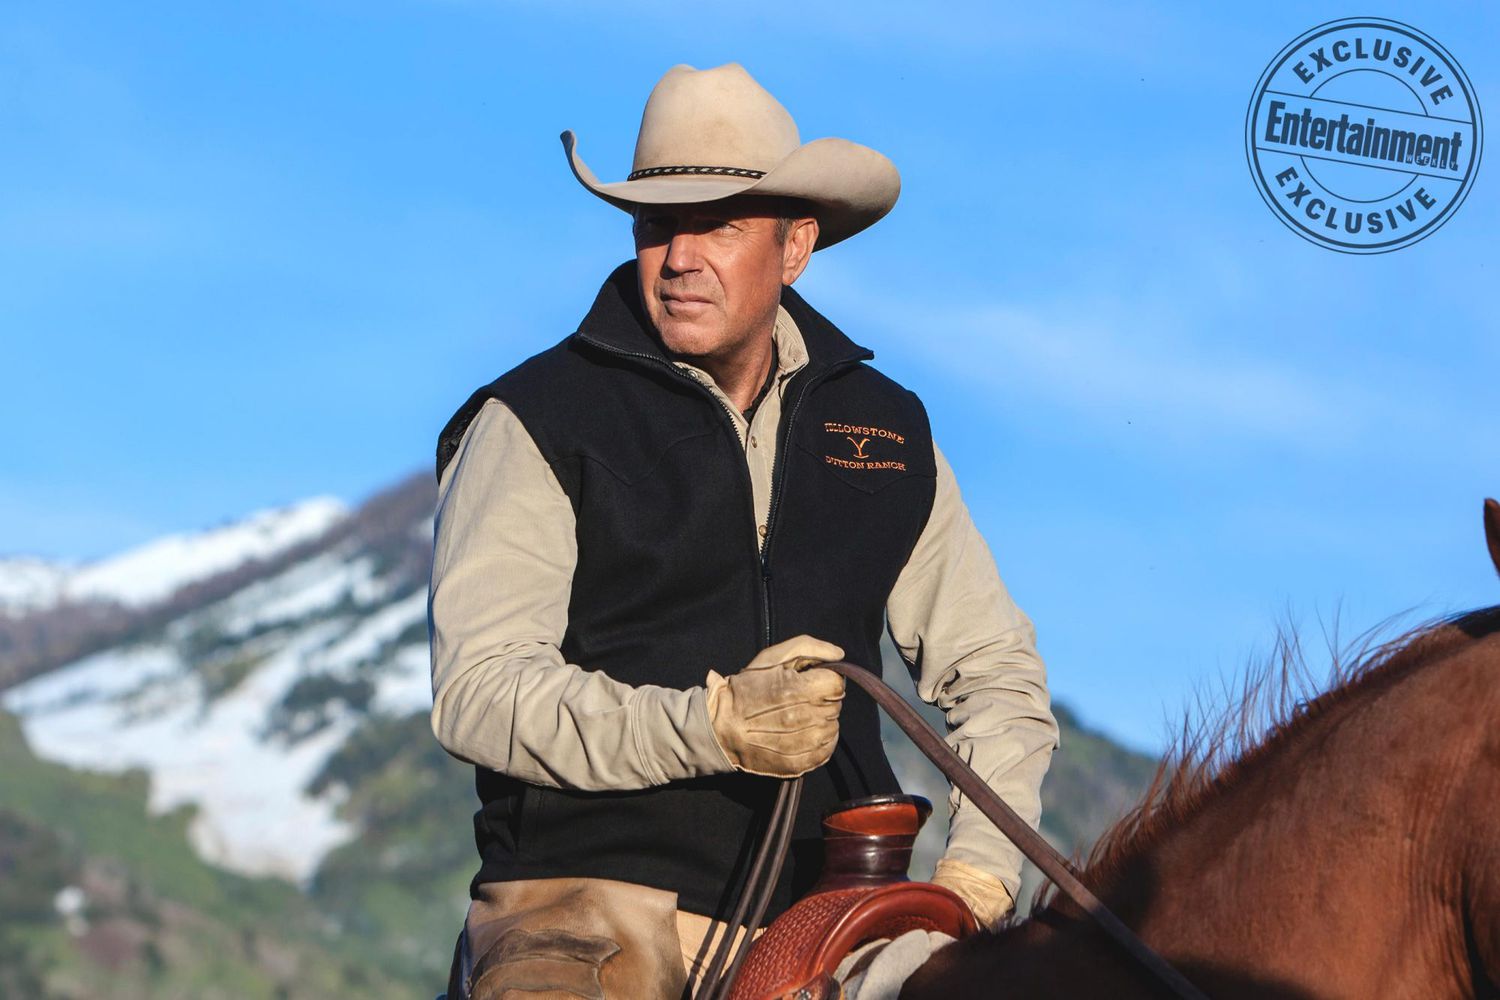 Kevin Costner in Yellowstone: Exclusive. kevin costner yellowstone. 